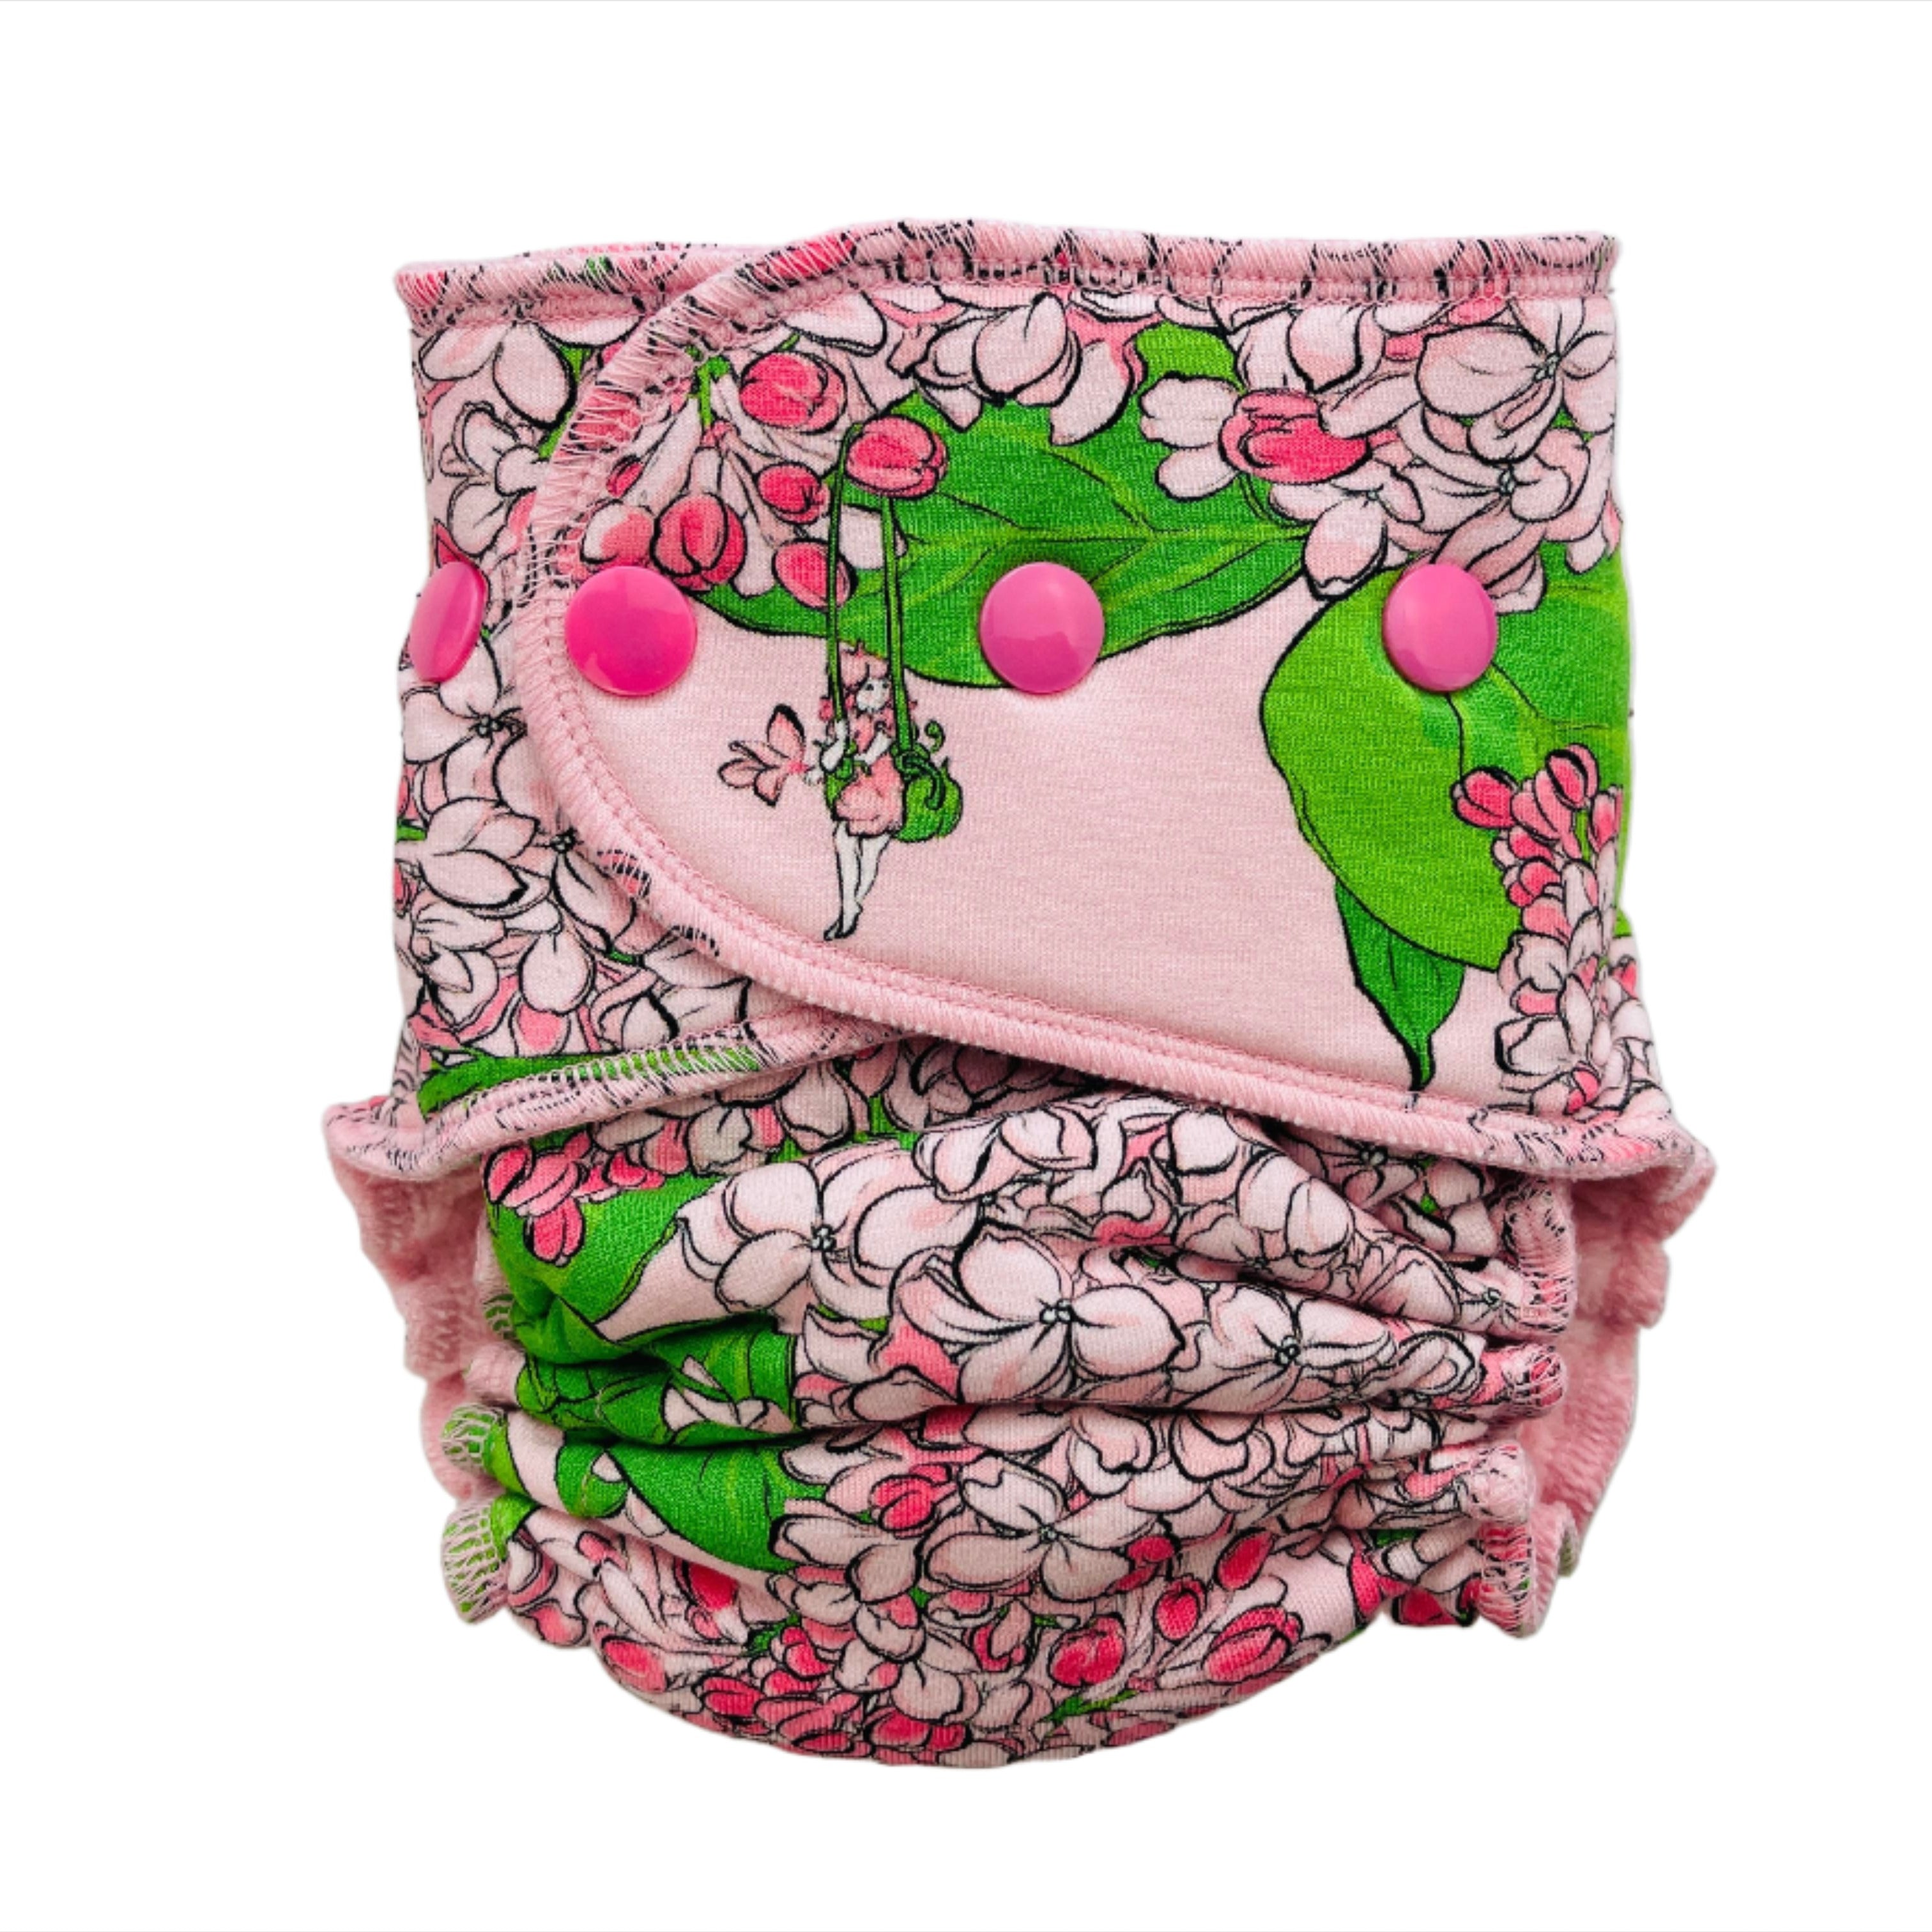 Lilly & Frank Fitted Cloth Diaper Meadowsweet Petite Hybrid Cloth Diaper - Hybrid - Classic Serged